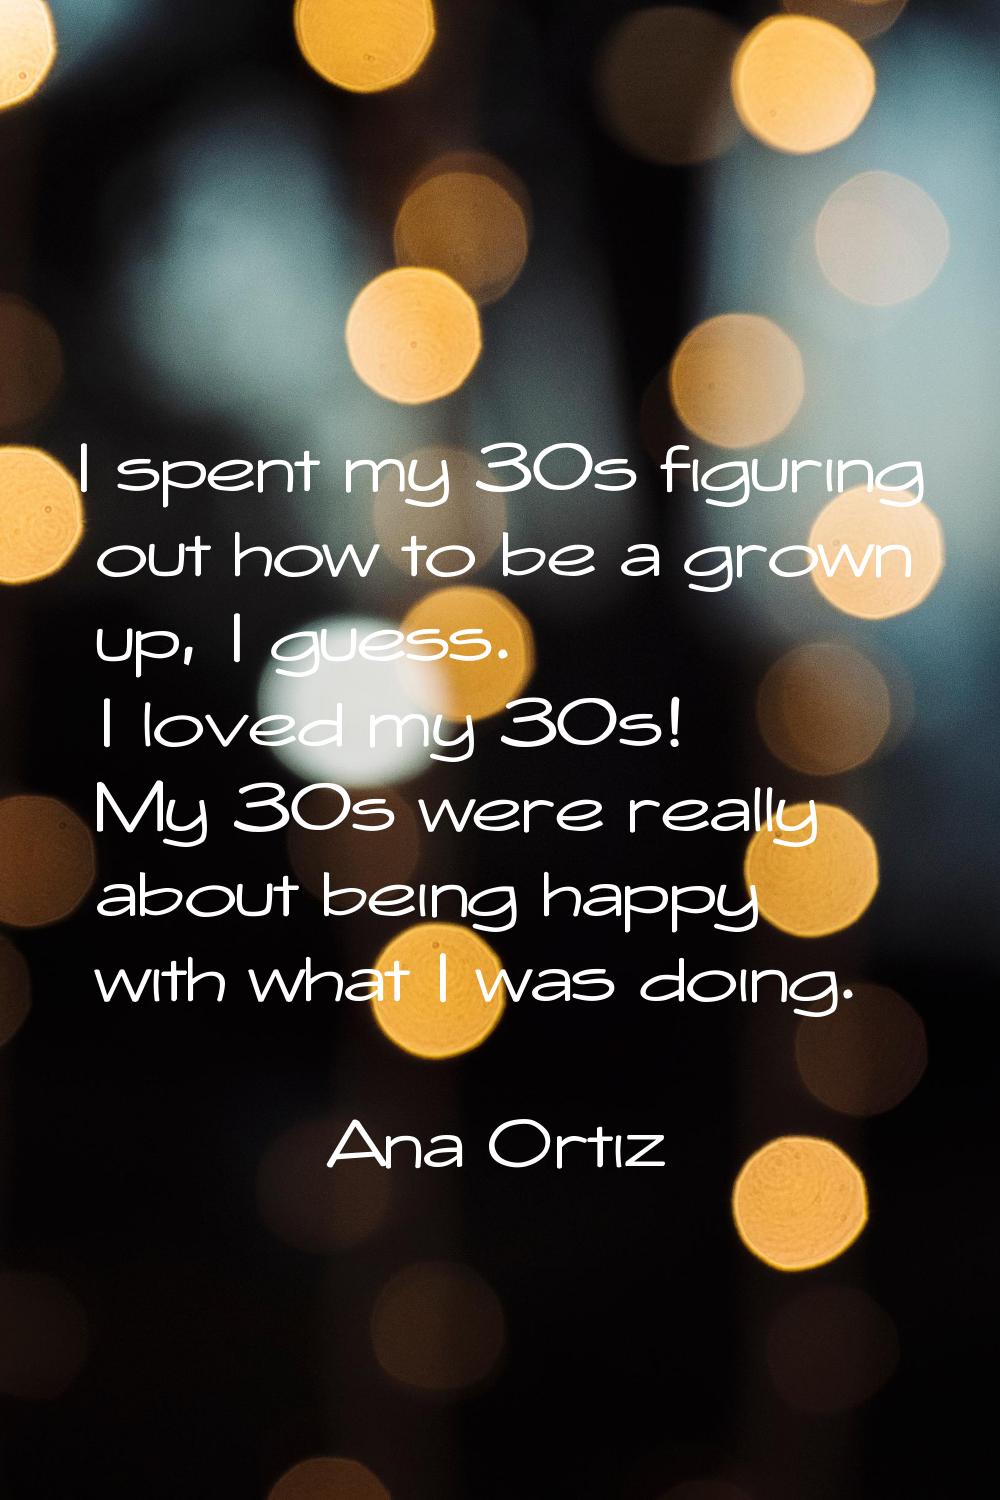 I spent my 30s figuring out how to be a grown up, I guess. I loved my 30s! My 30s were really about